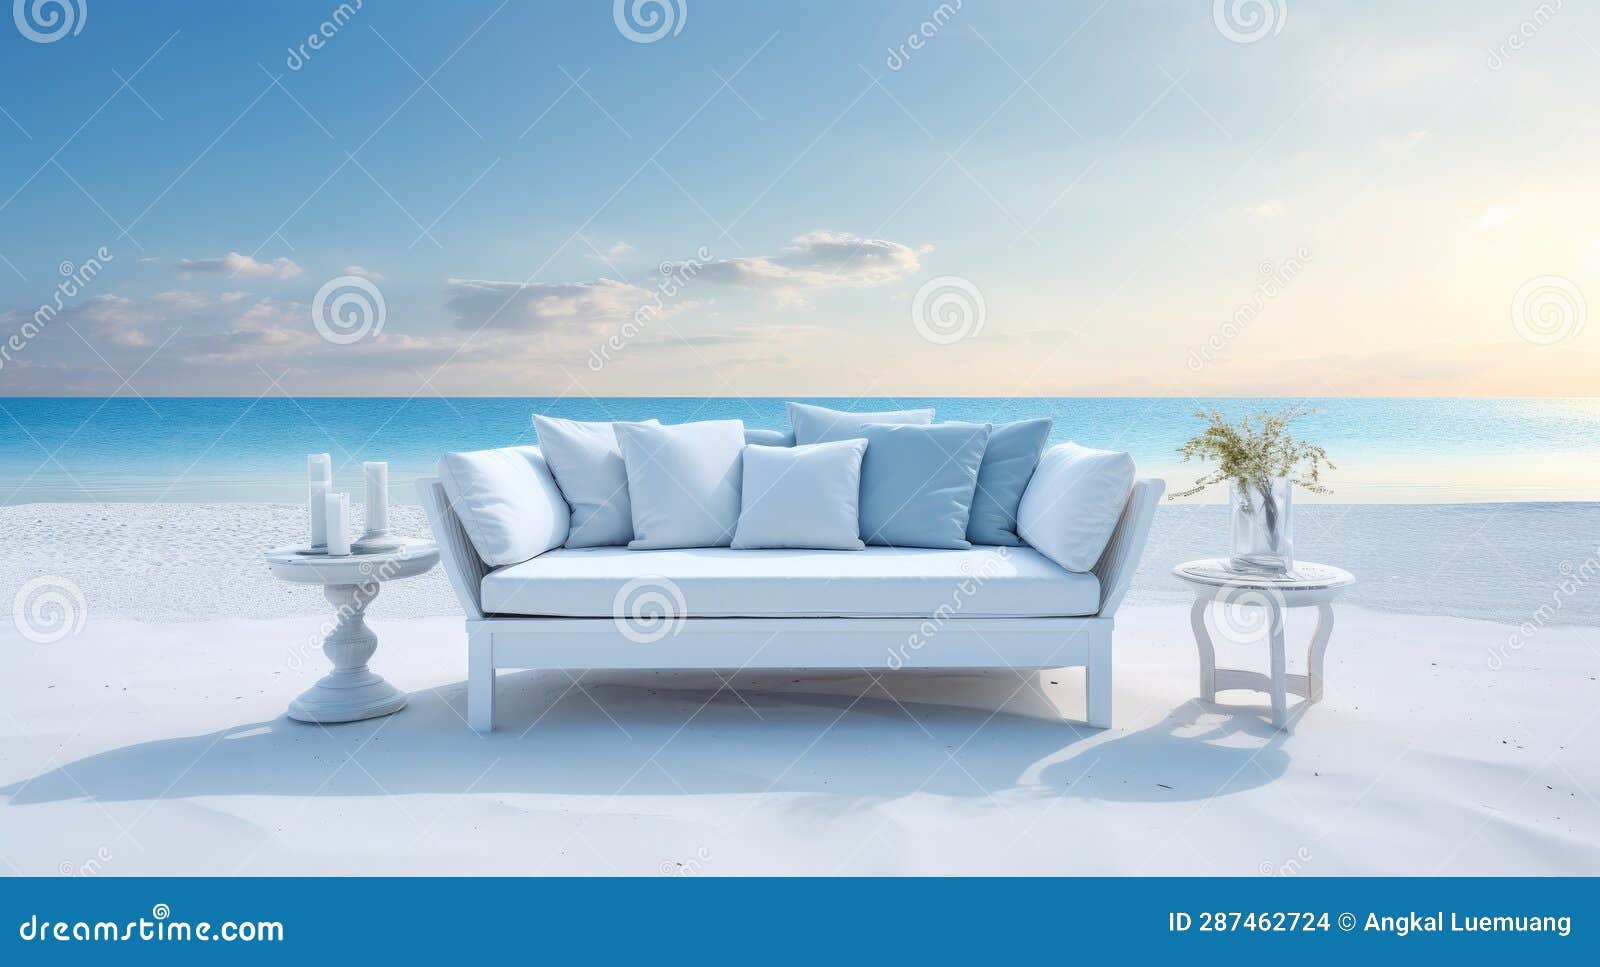 furniture and beach luxury home with sky-blue, tranquil gardenscapes, poolcore